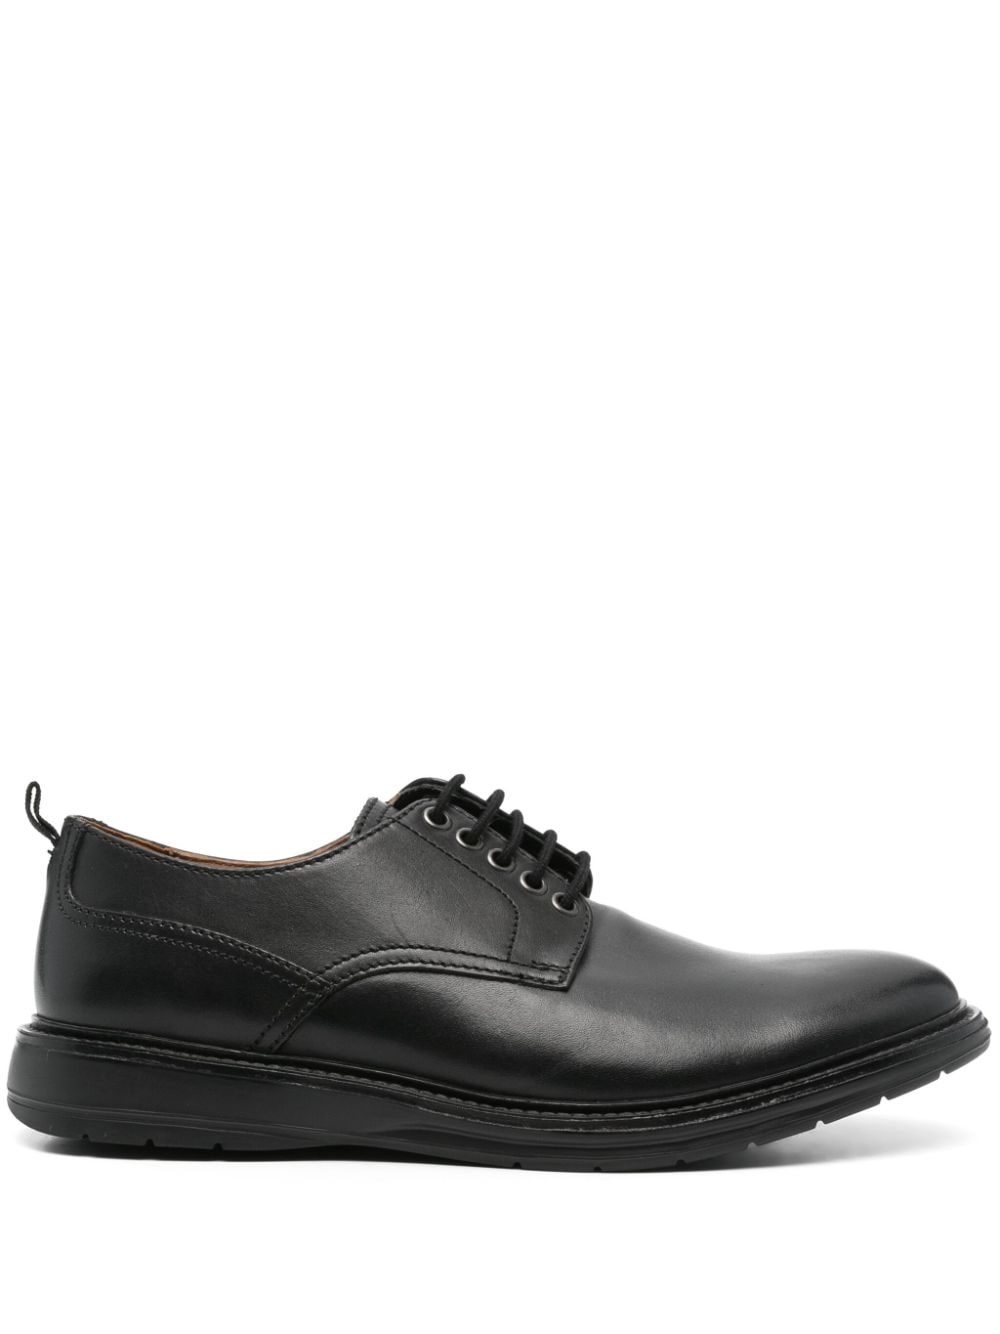 Clarks Chantry Walk leather derby shoes Black